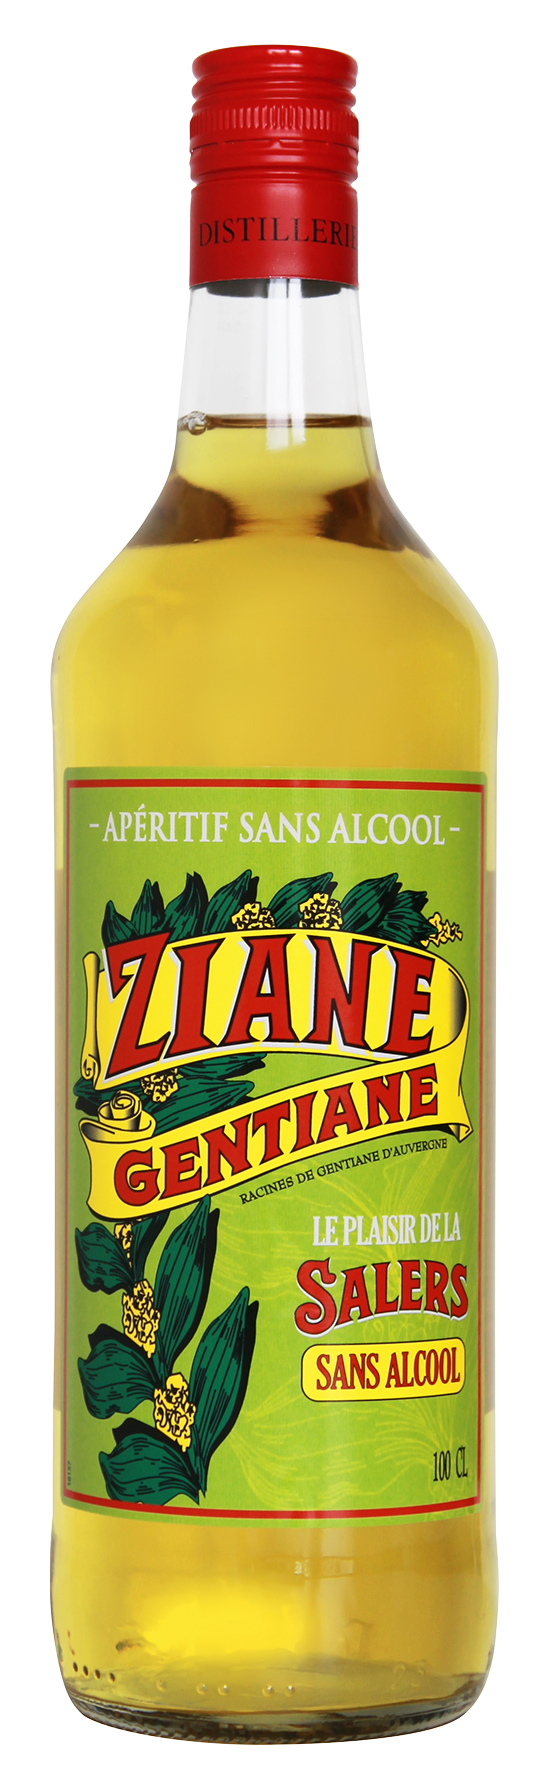 SALERS Ziane Alcohol Free Drink - 1000ml